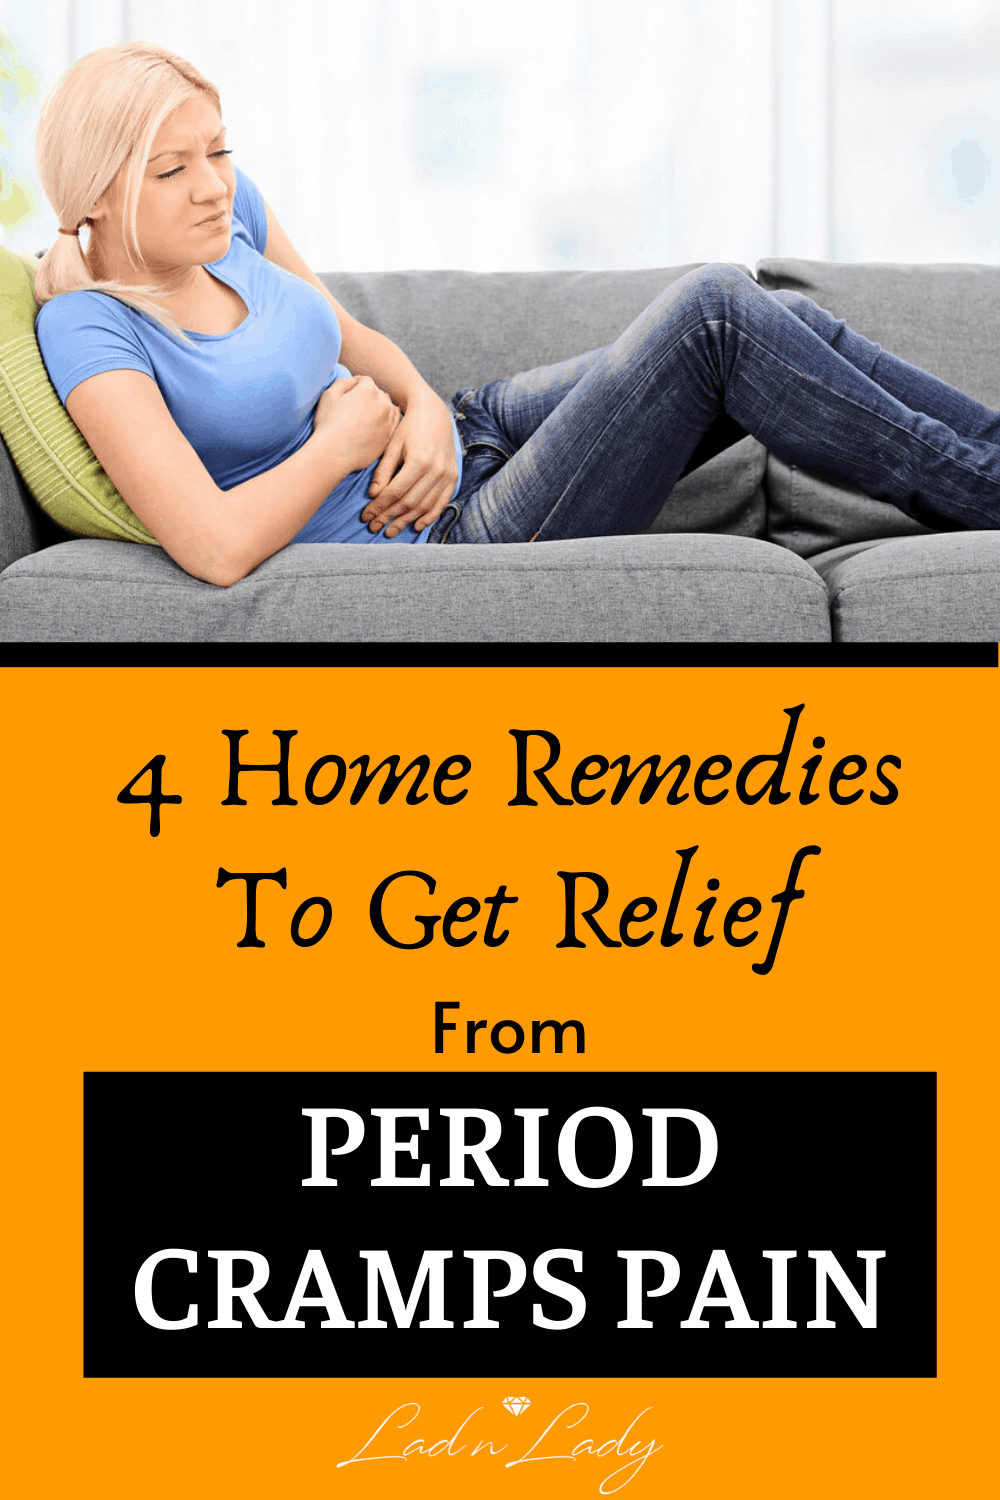 4 Home Remedies To Get Rid of Period Cramps